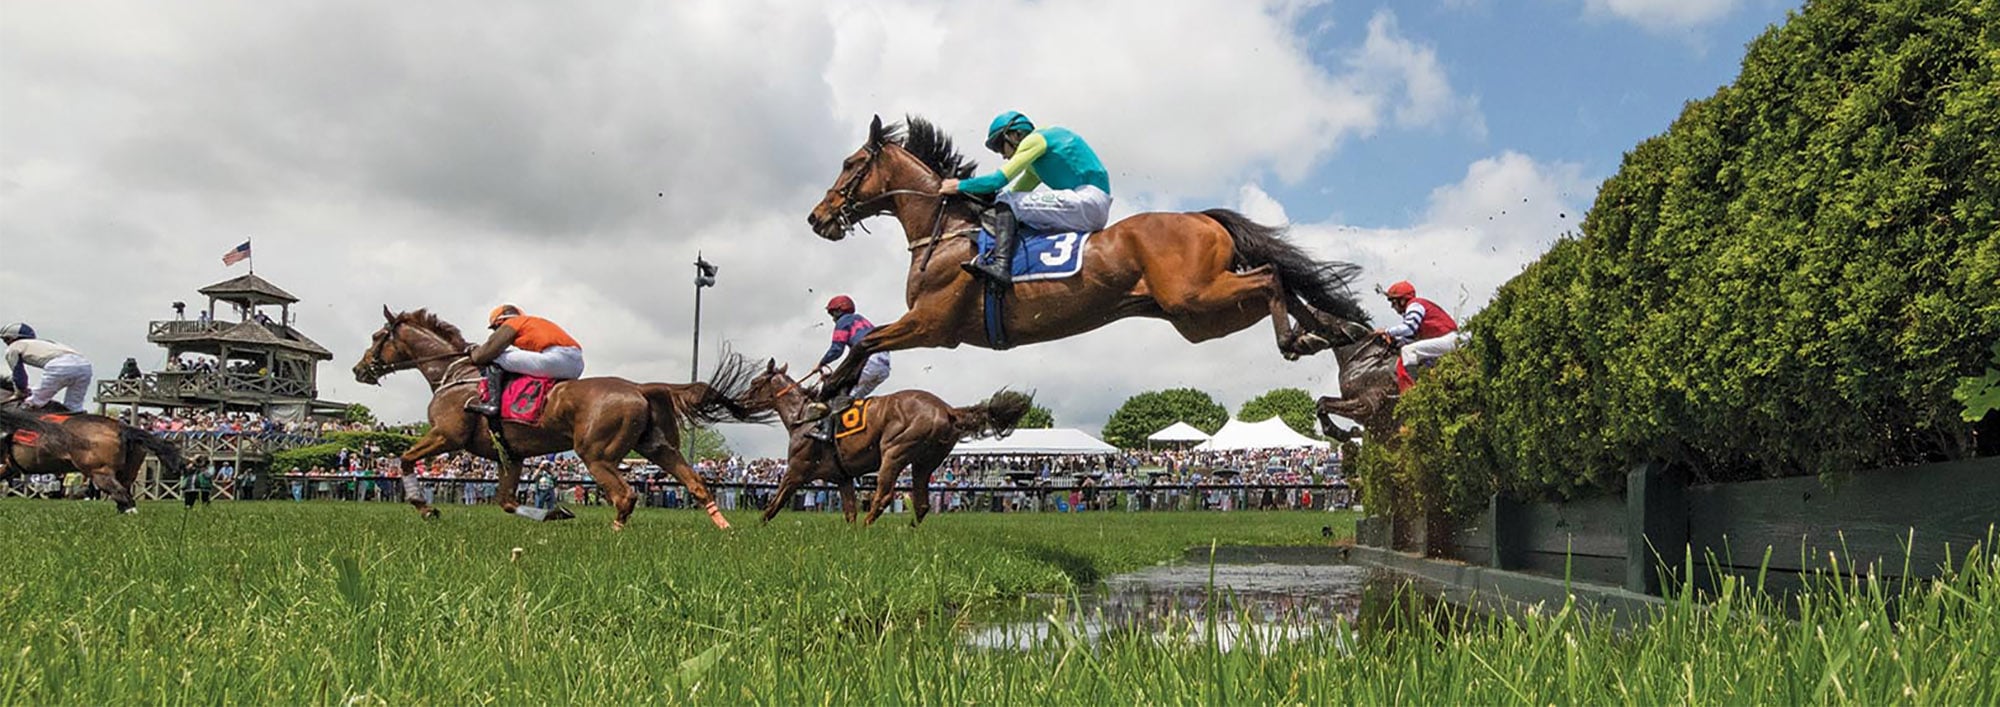 The Spirit of the Sport: Why Horse Racing is More Than Just a Gamble photo